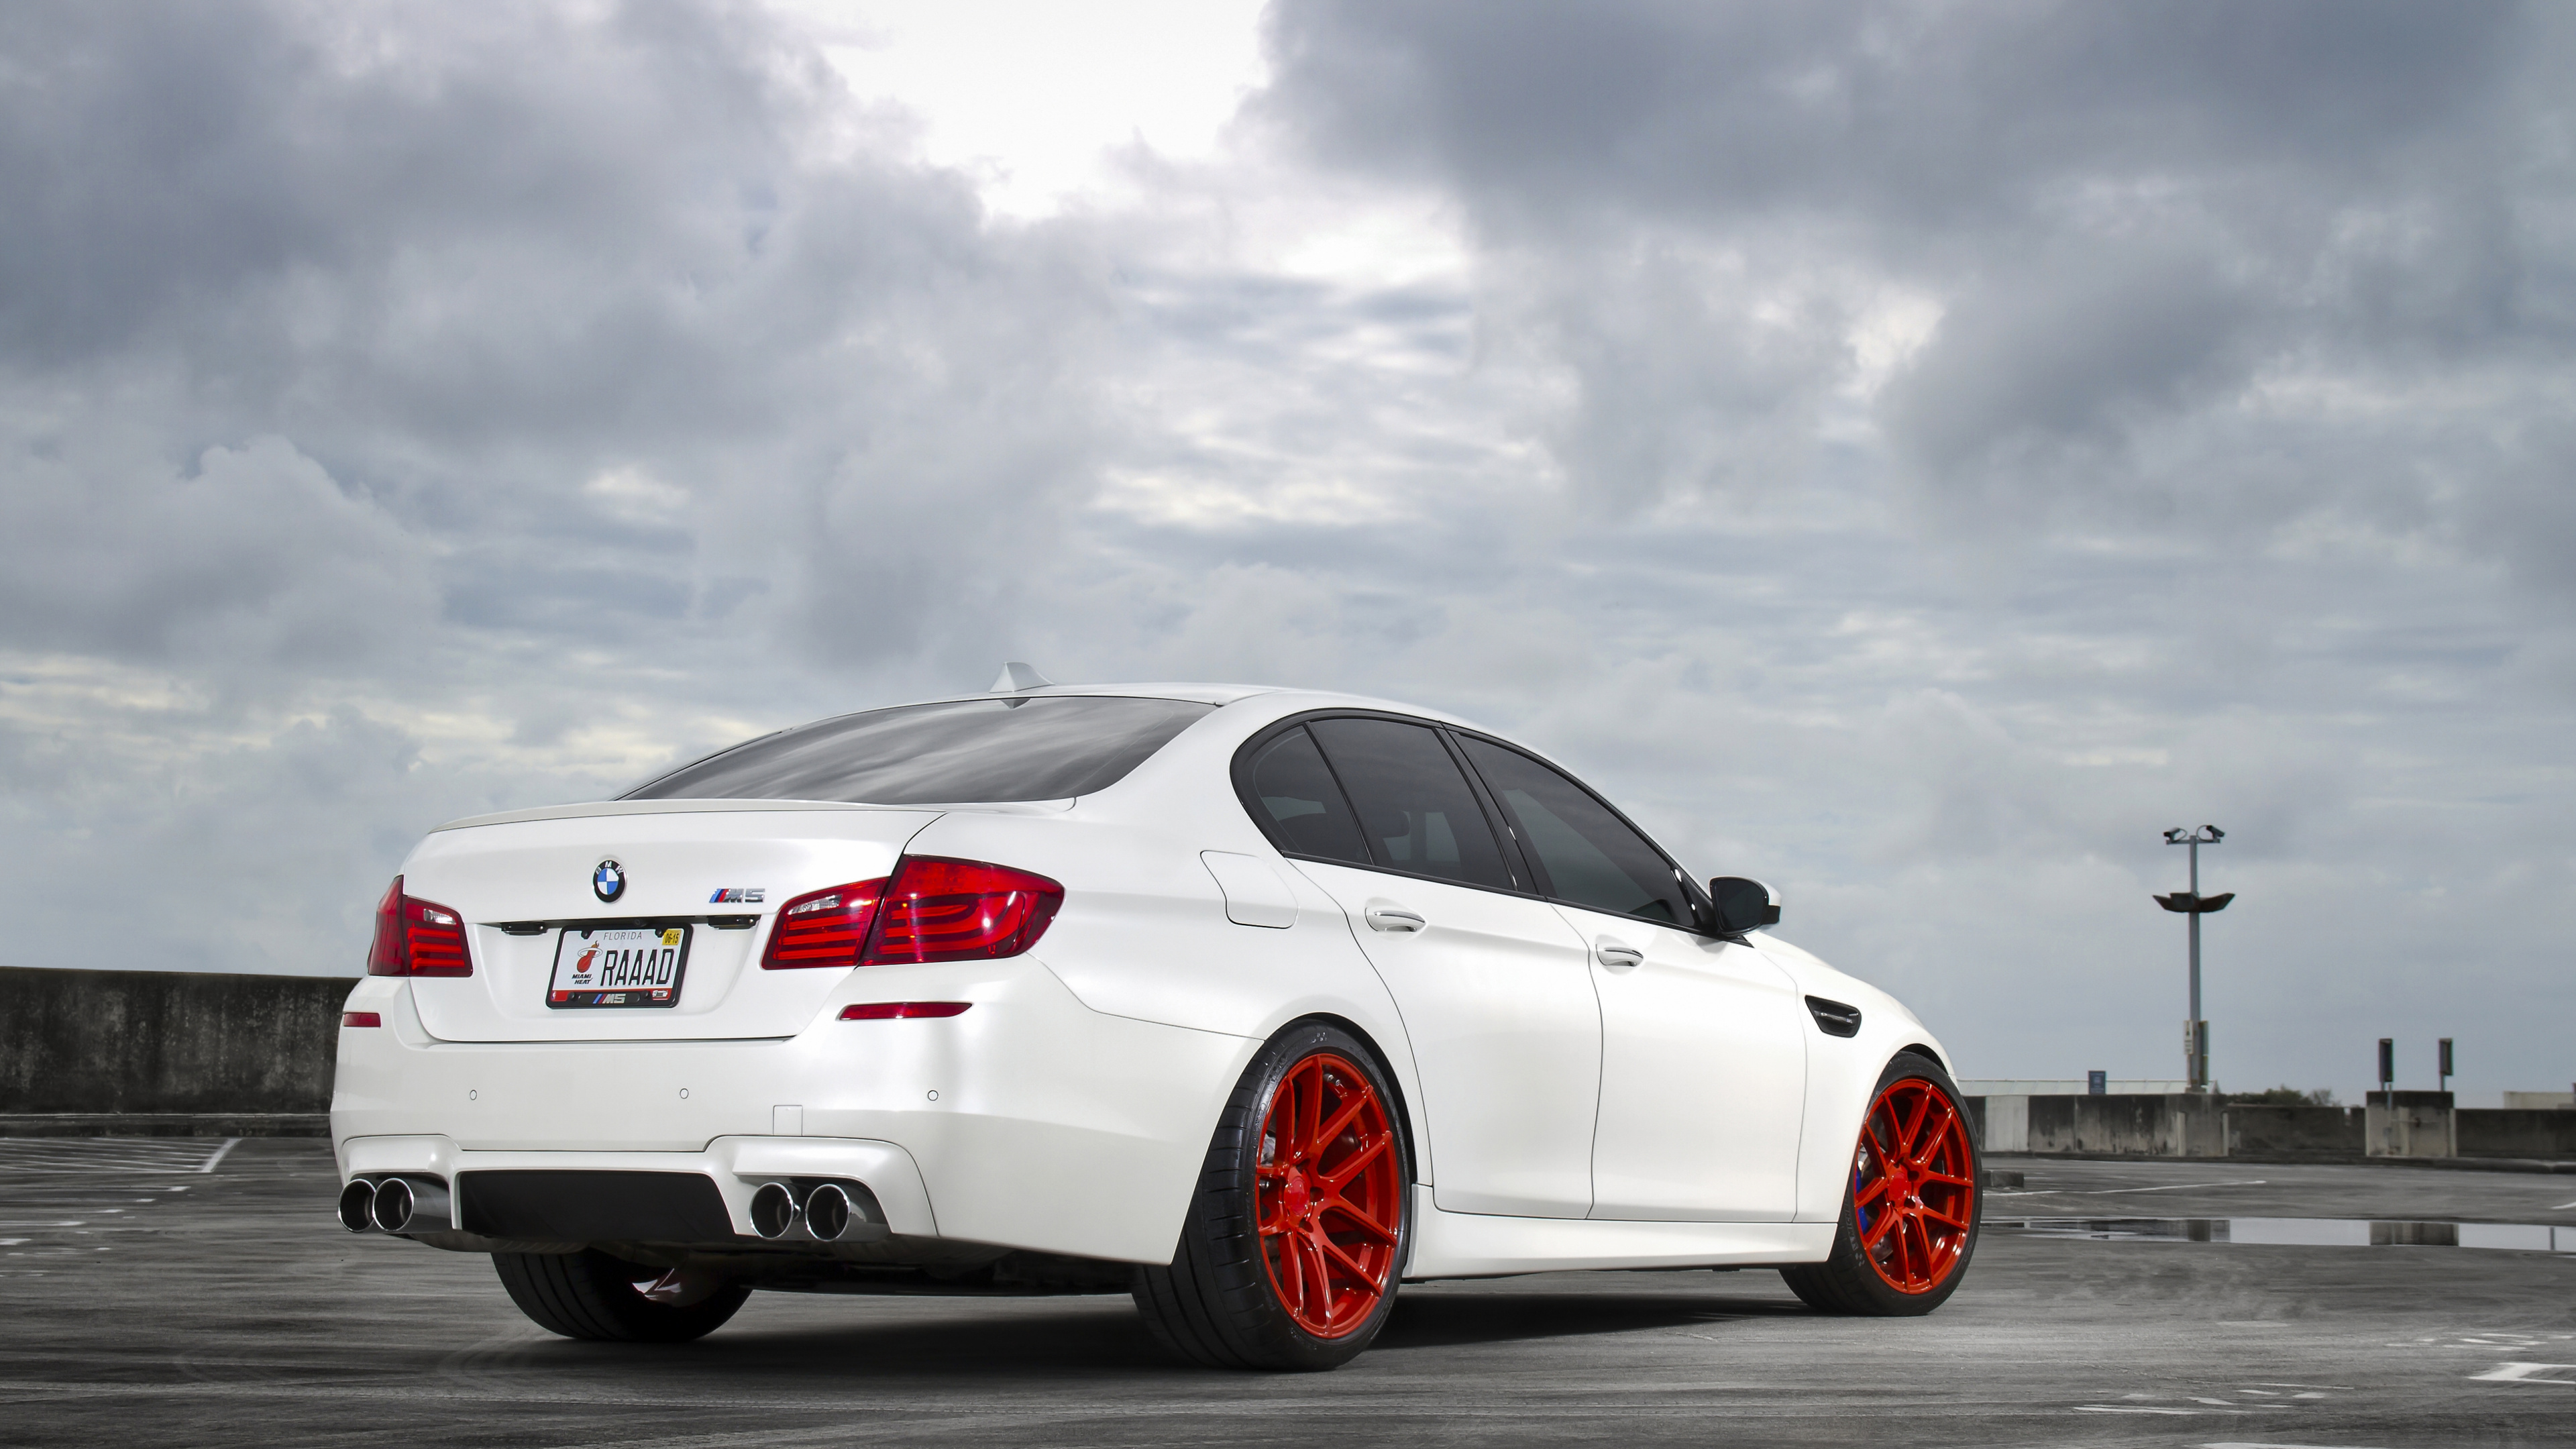 White Bmw m 3 Coupe on Gray Asphalt Road. Wallpaper in 3840x2160 Resolution